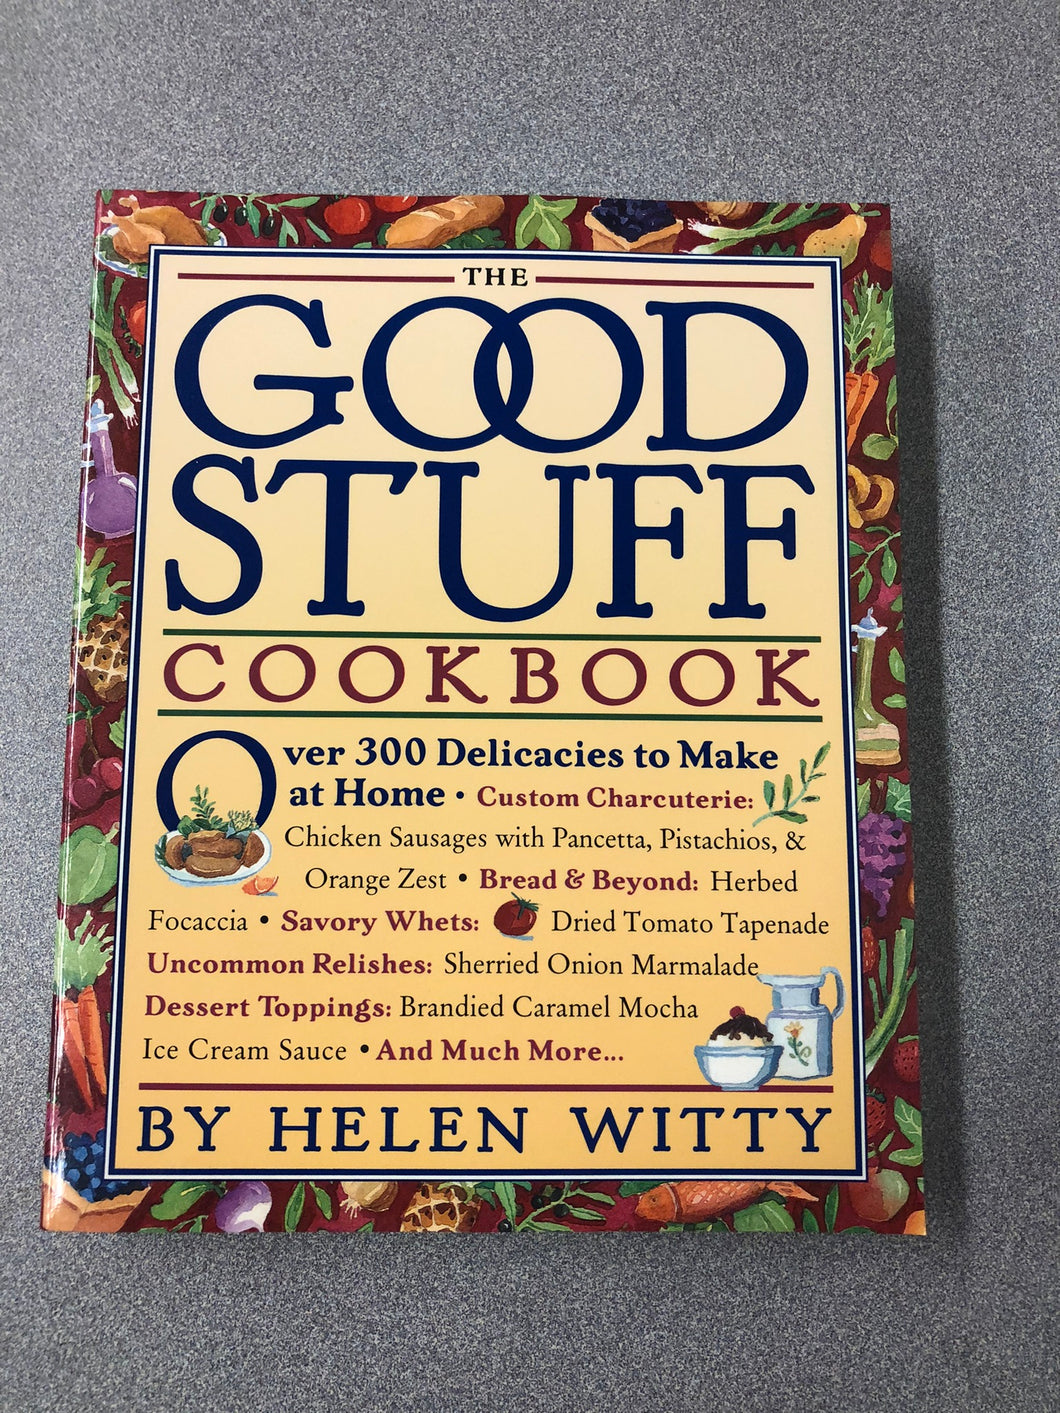 The Good Stuff Cookbook: Over 300 Delicacies to Make at Home, Witty, Helen [1997] CO 7/22